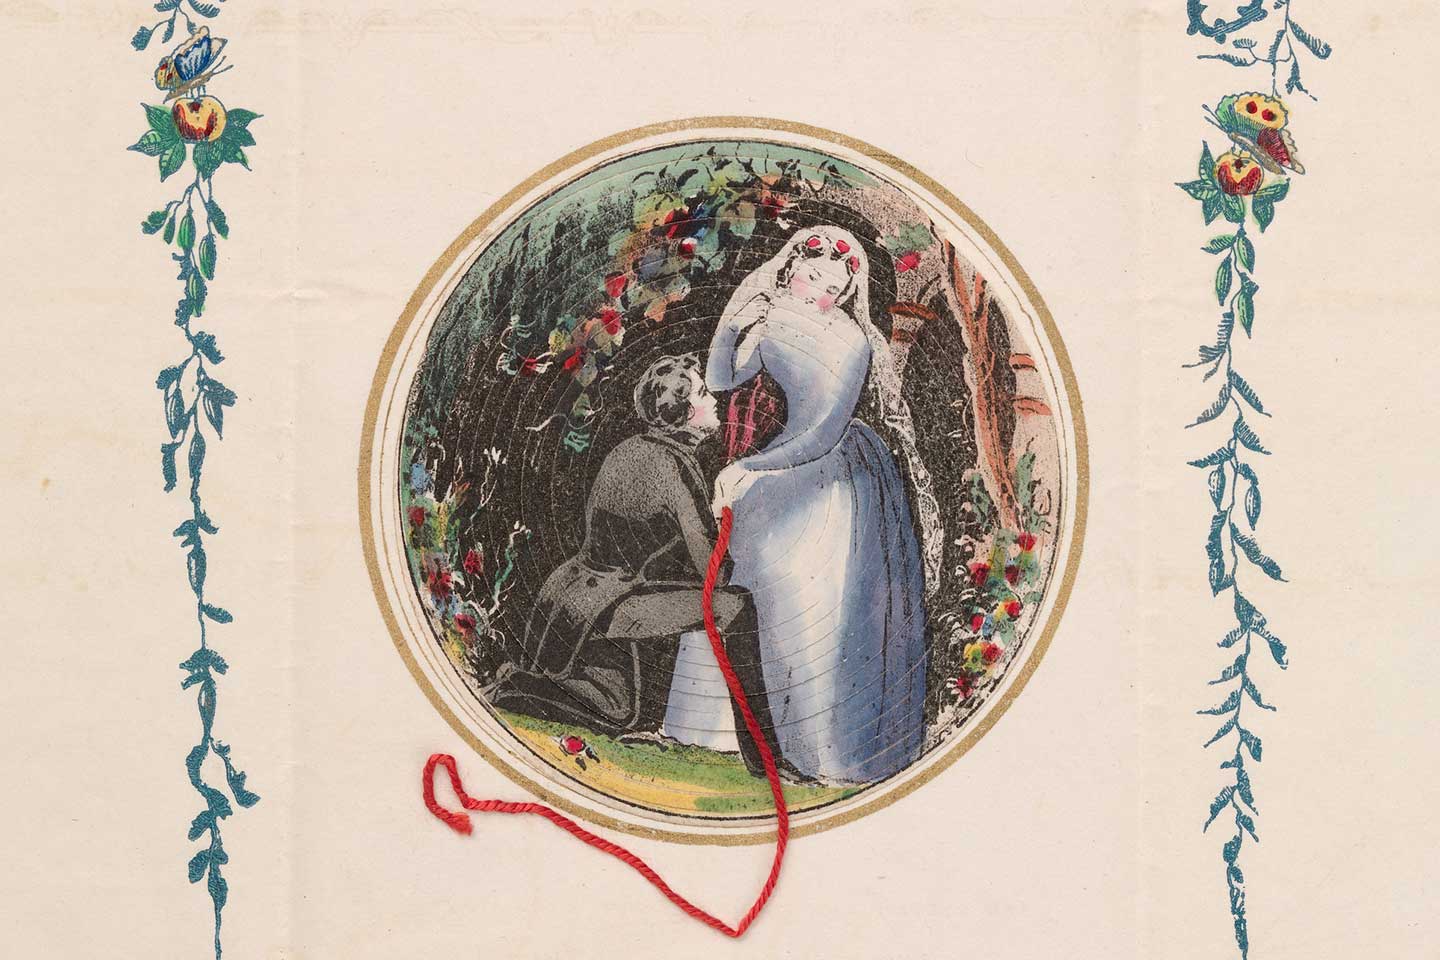 A late-nineteenth-century cobweb valentine depicting a man on his knees professing his love to a woman